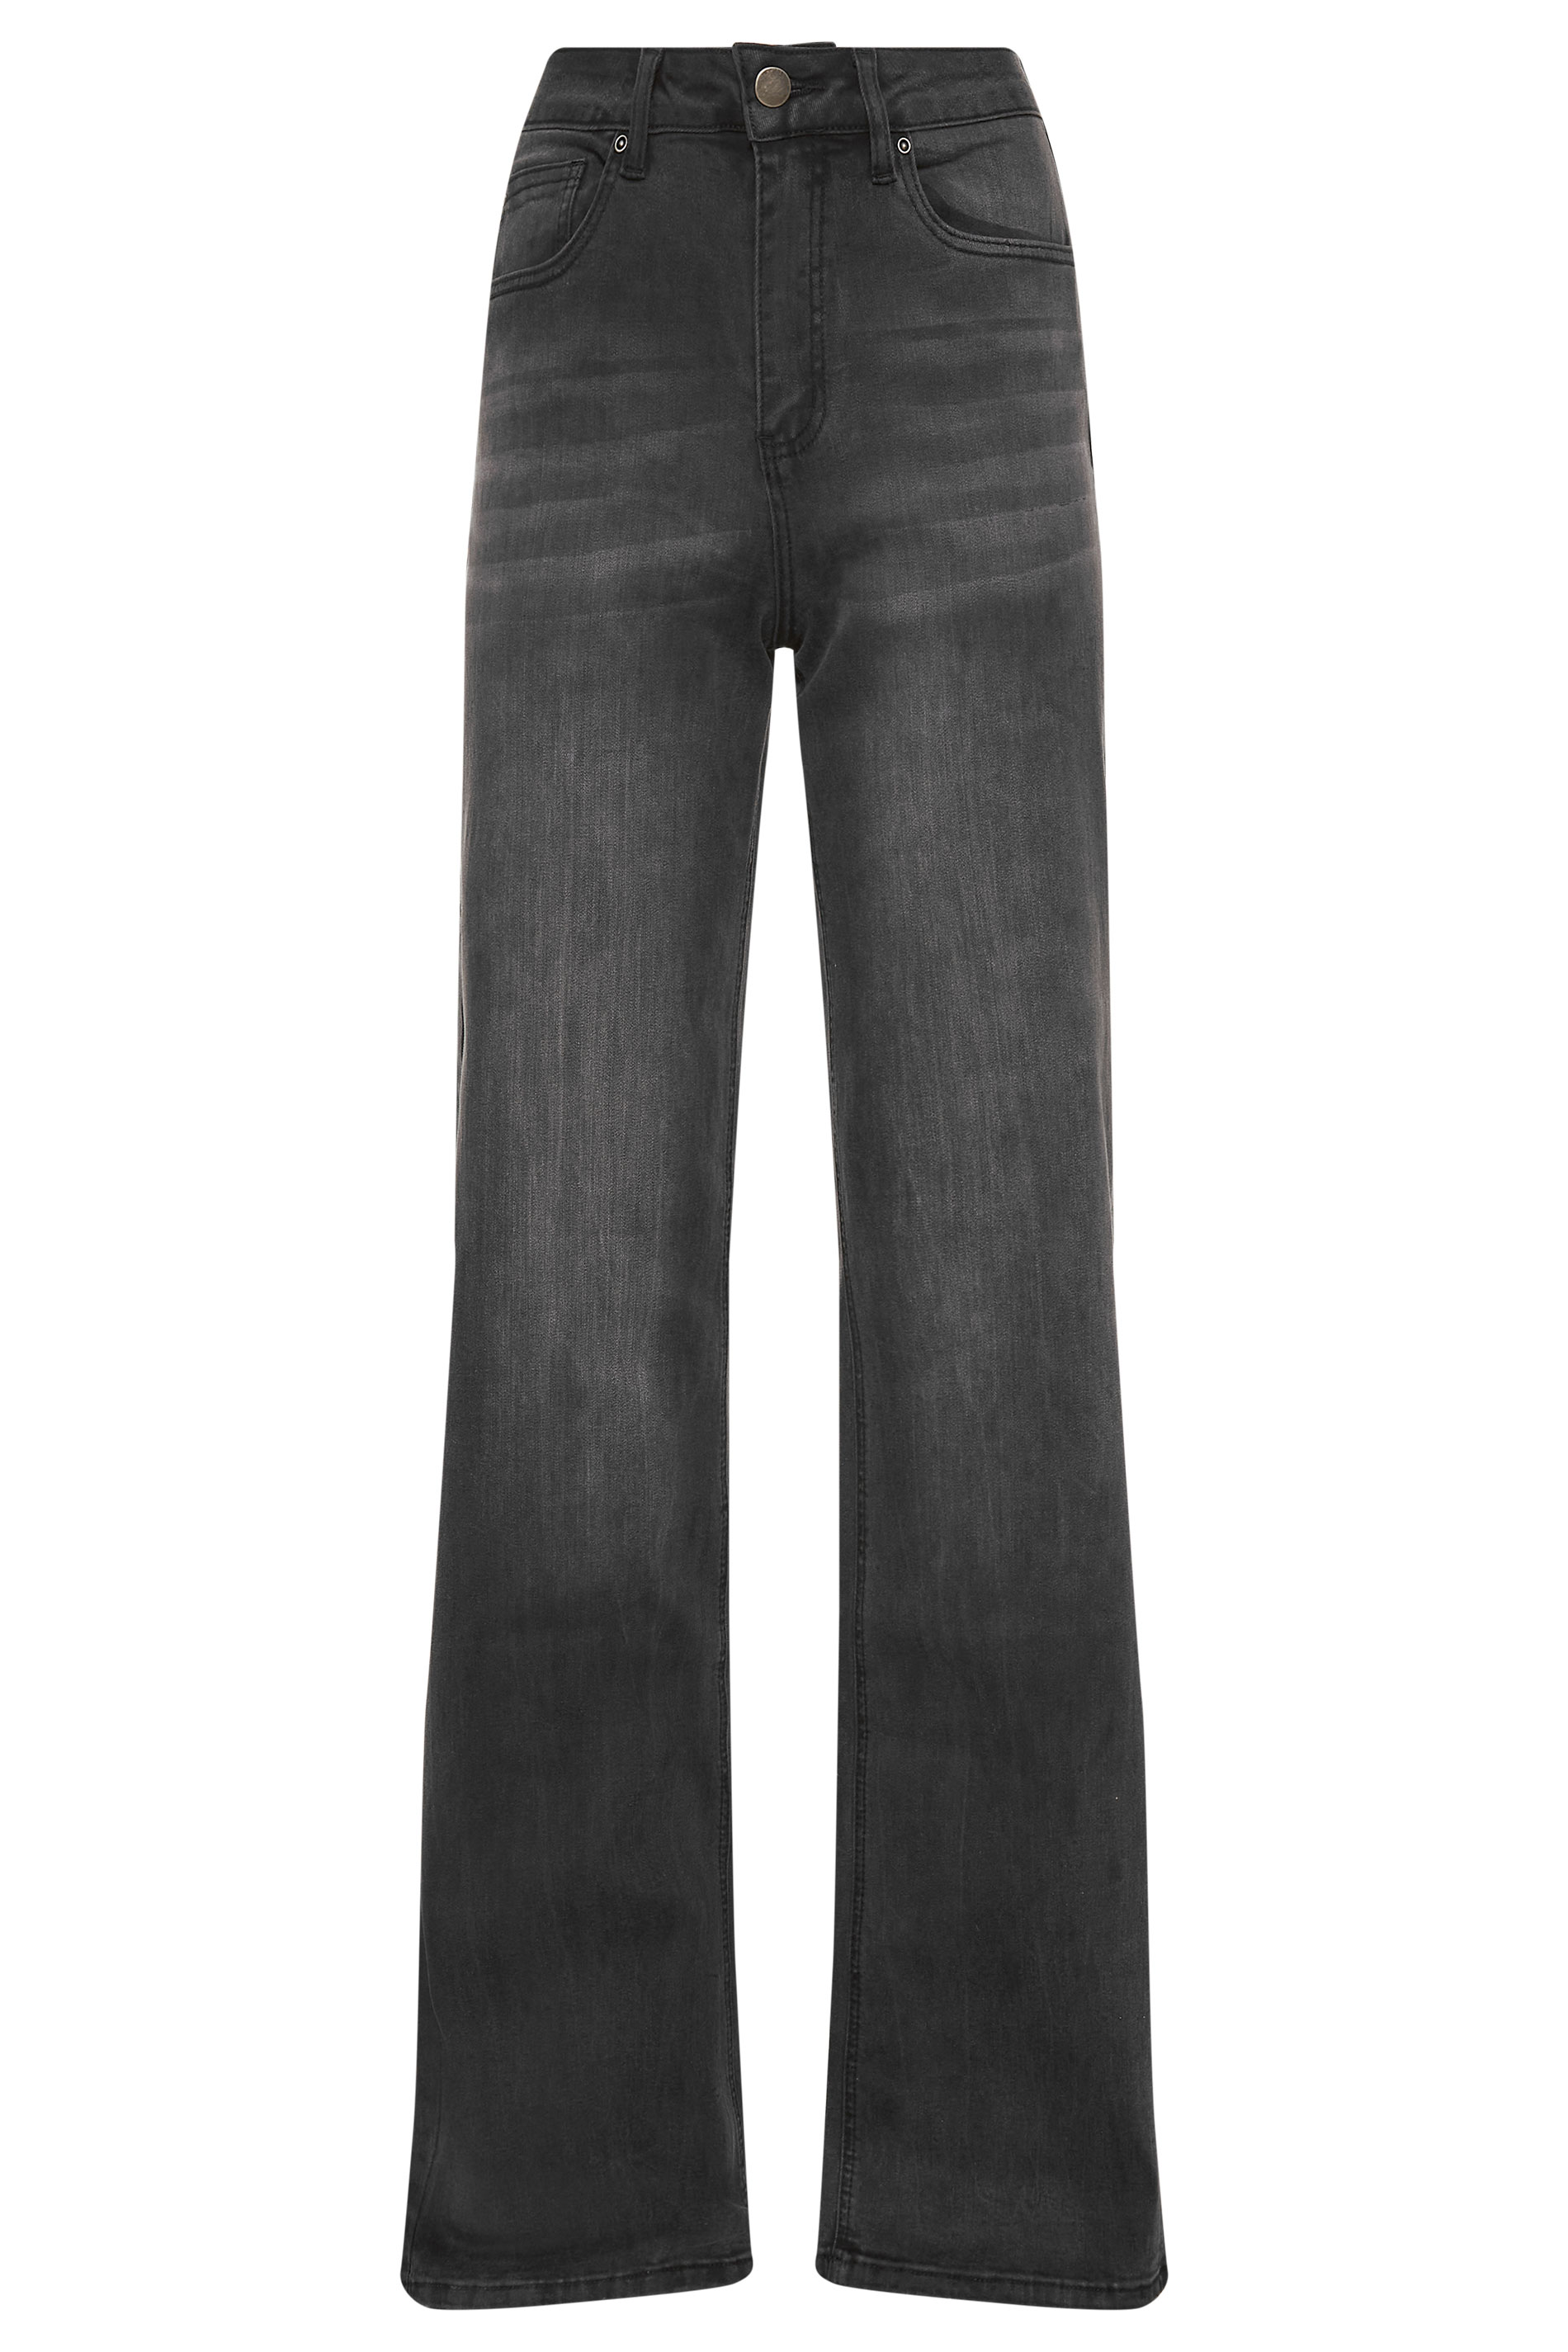 Tall Women's LTS Washed Black Wide Leg Jeans | Long Tall Sally 1